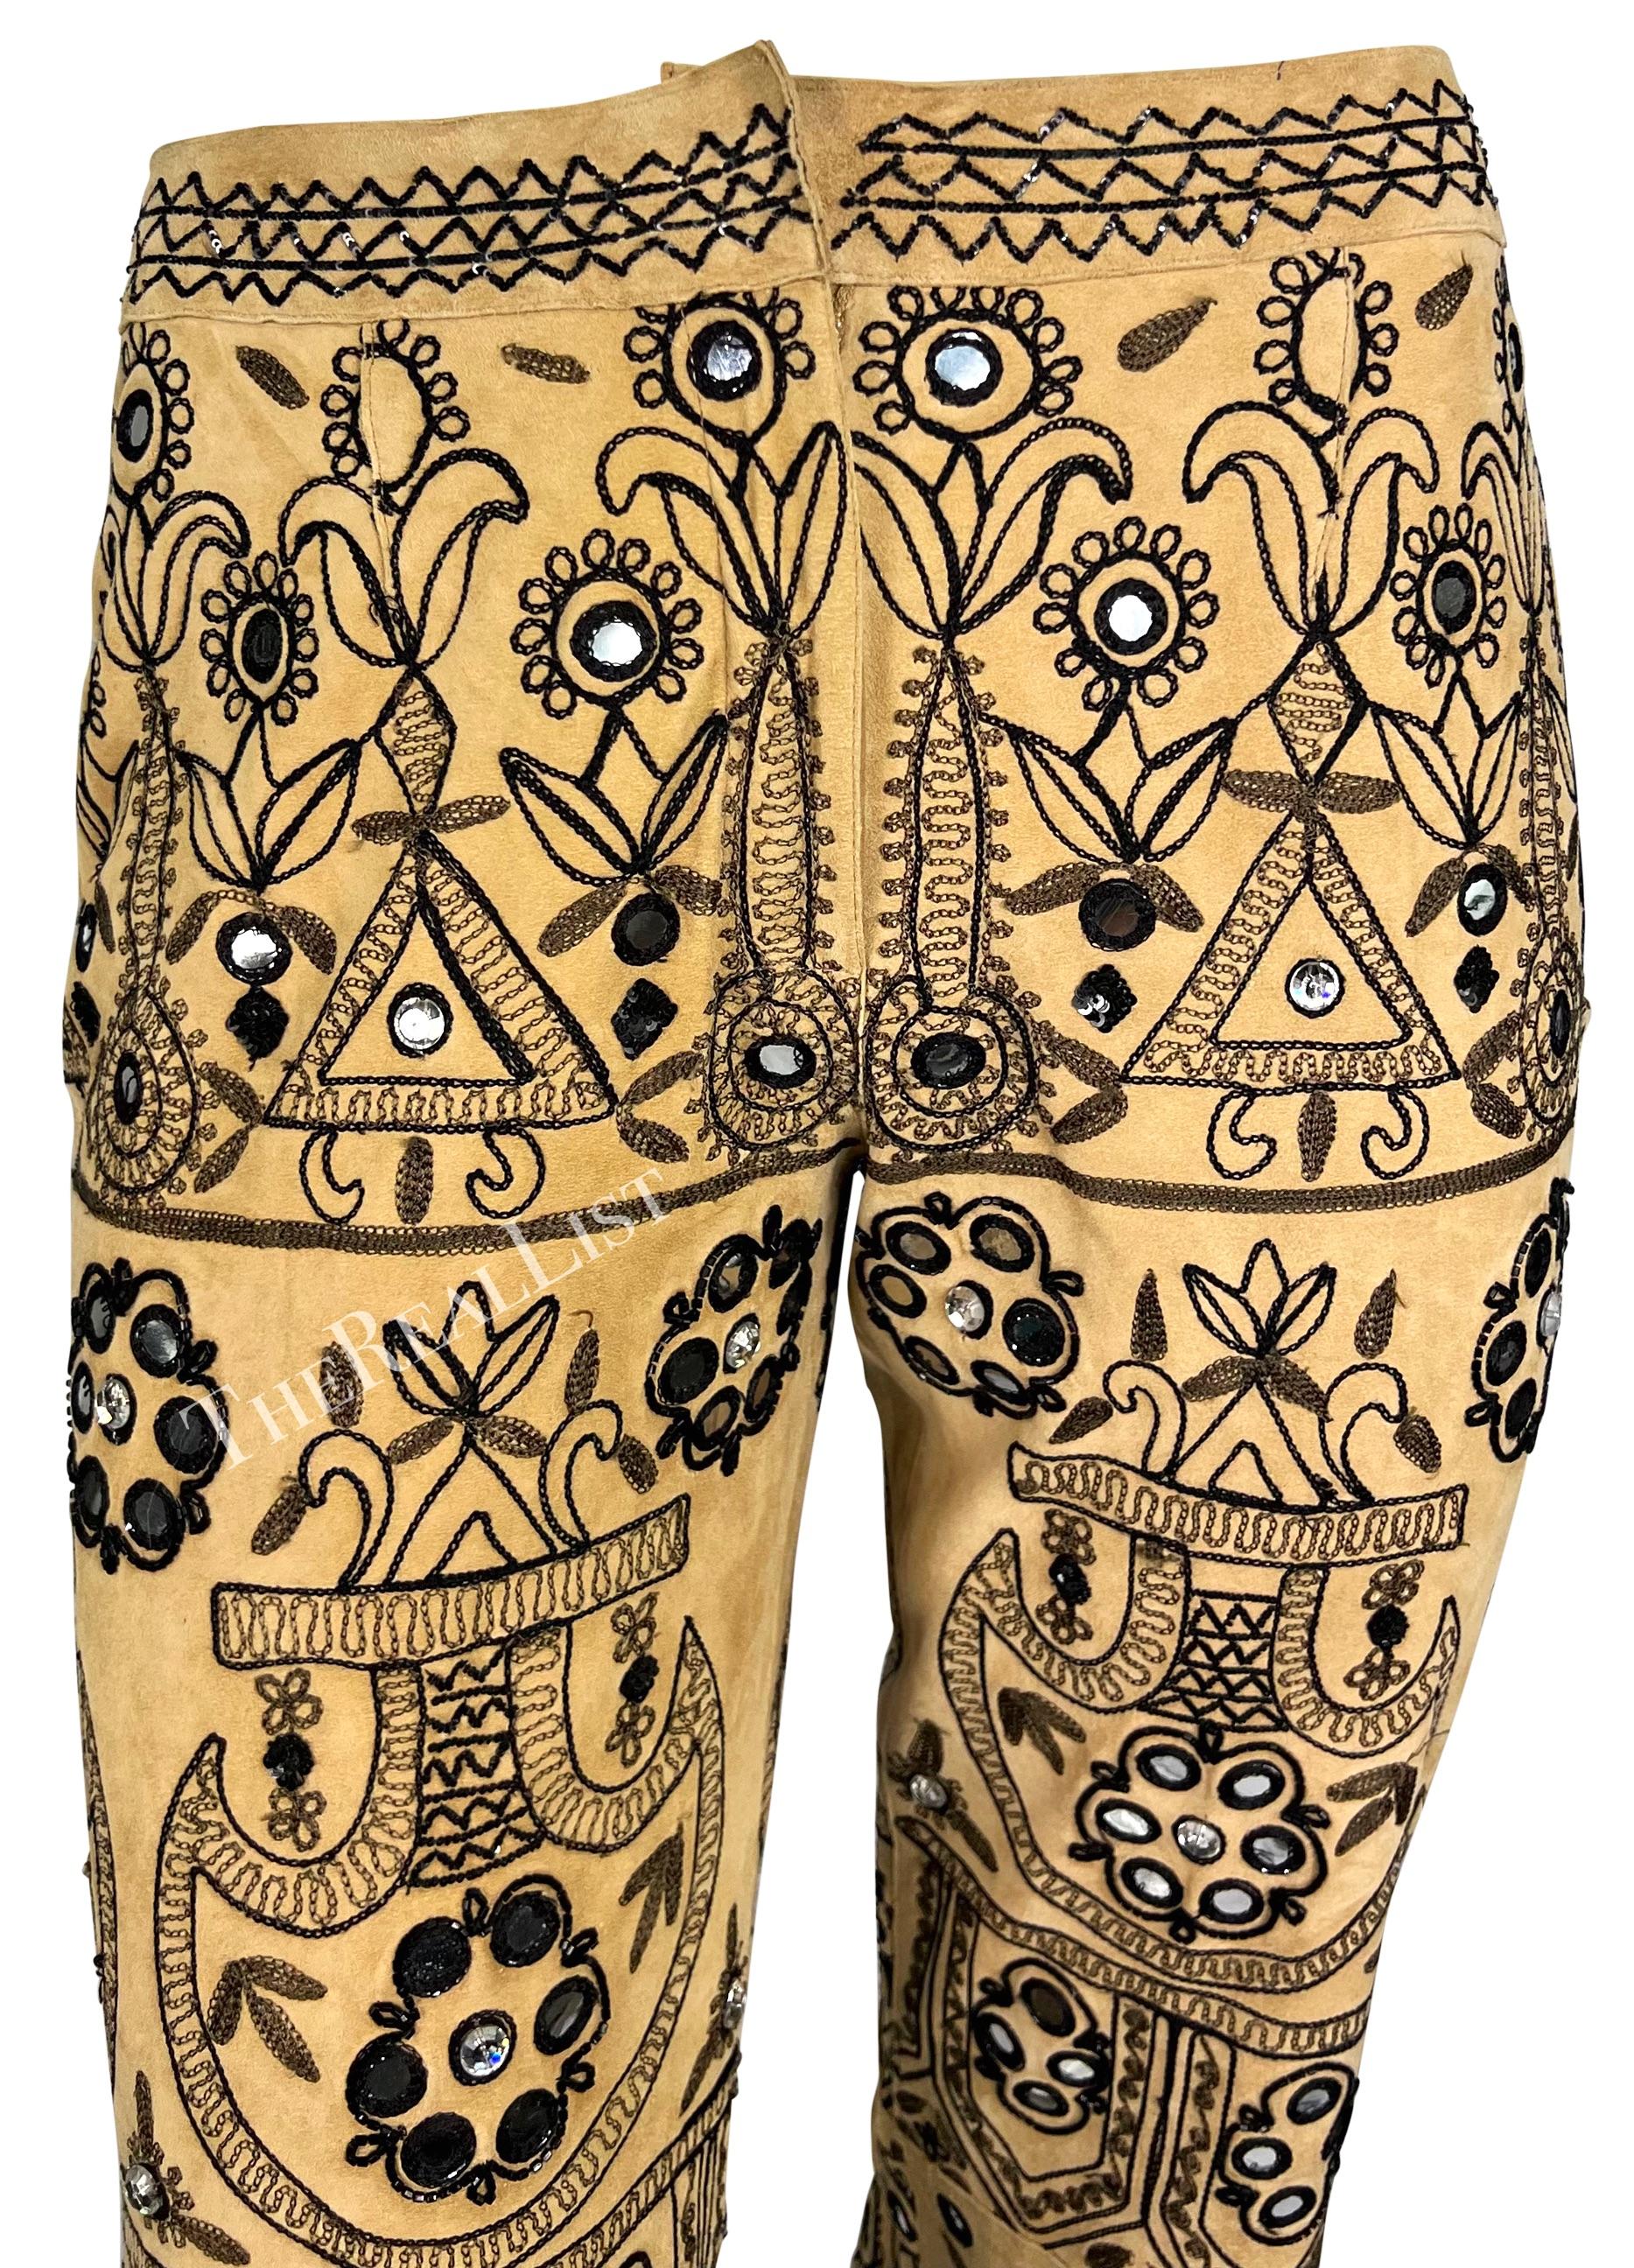 S/S 2001 Dolce & Gabbana Mirror Embroidered Tan Suede Flare Pants For Sale 2